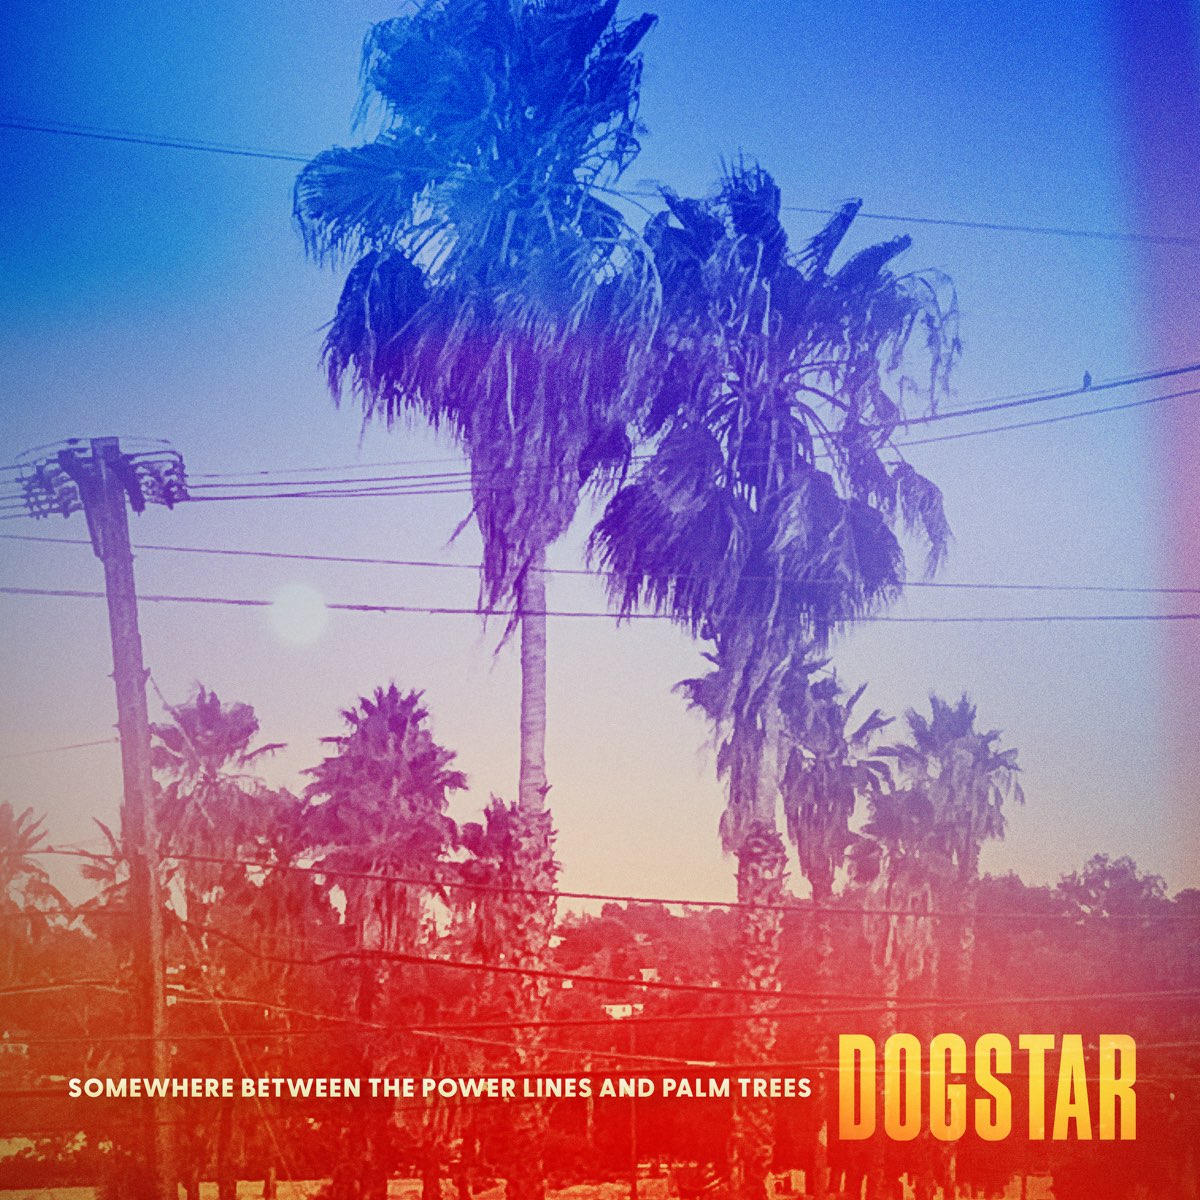 DOGSTAR - Somewhere Between the Power Lines and Palm Trees - LP - Leaf Green Vinyl [OCT 6]